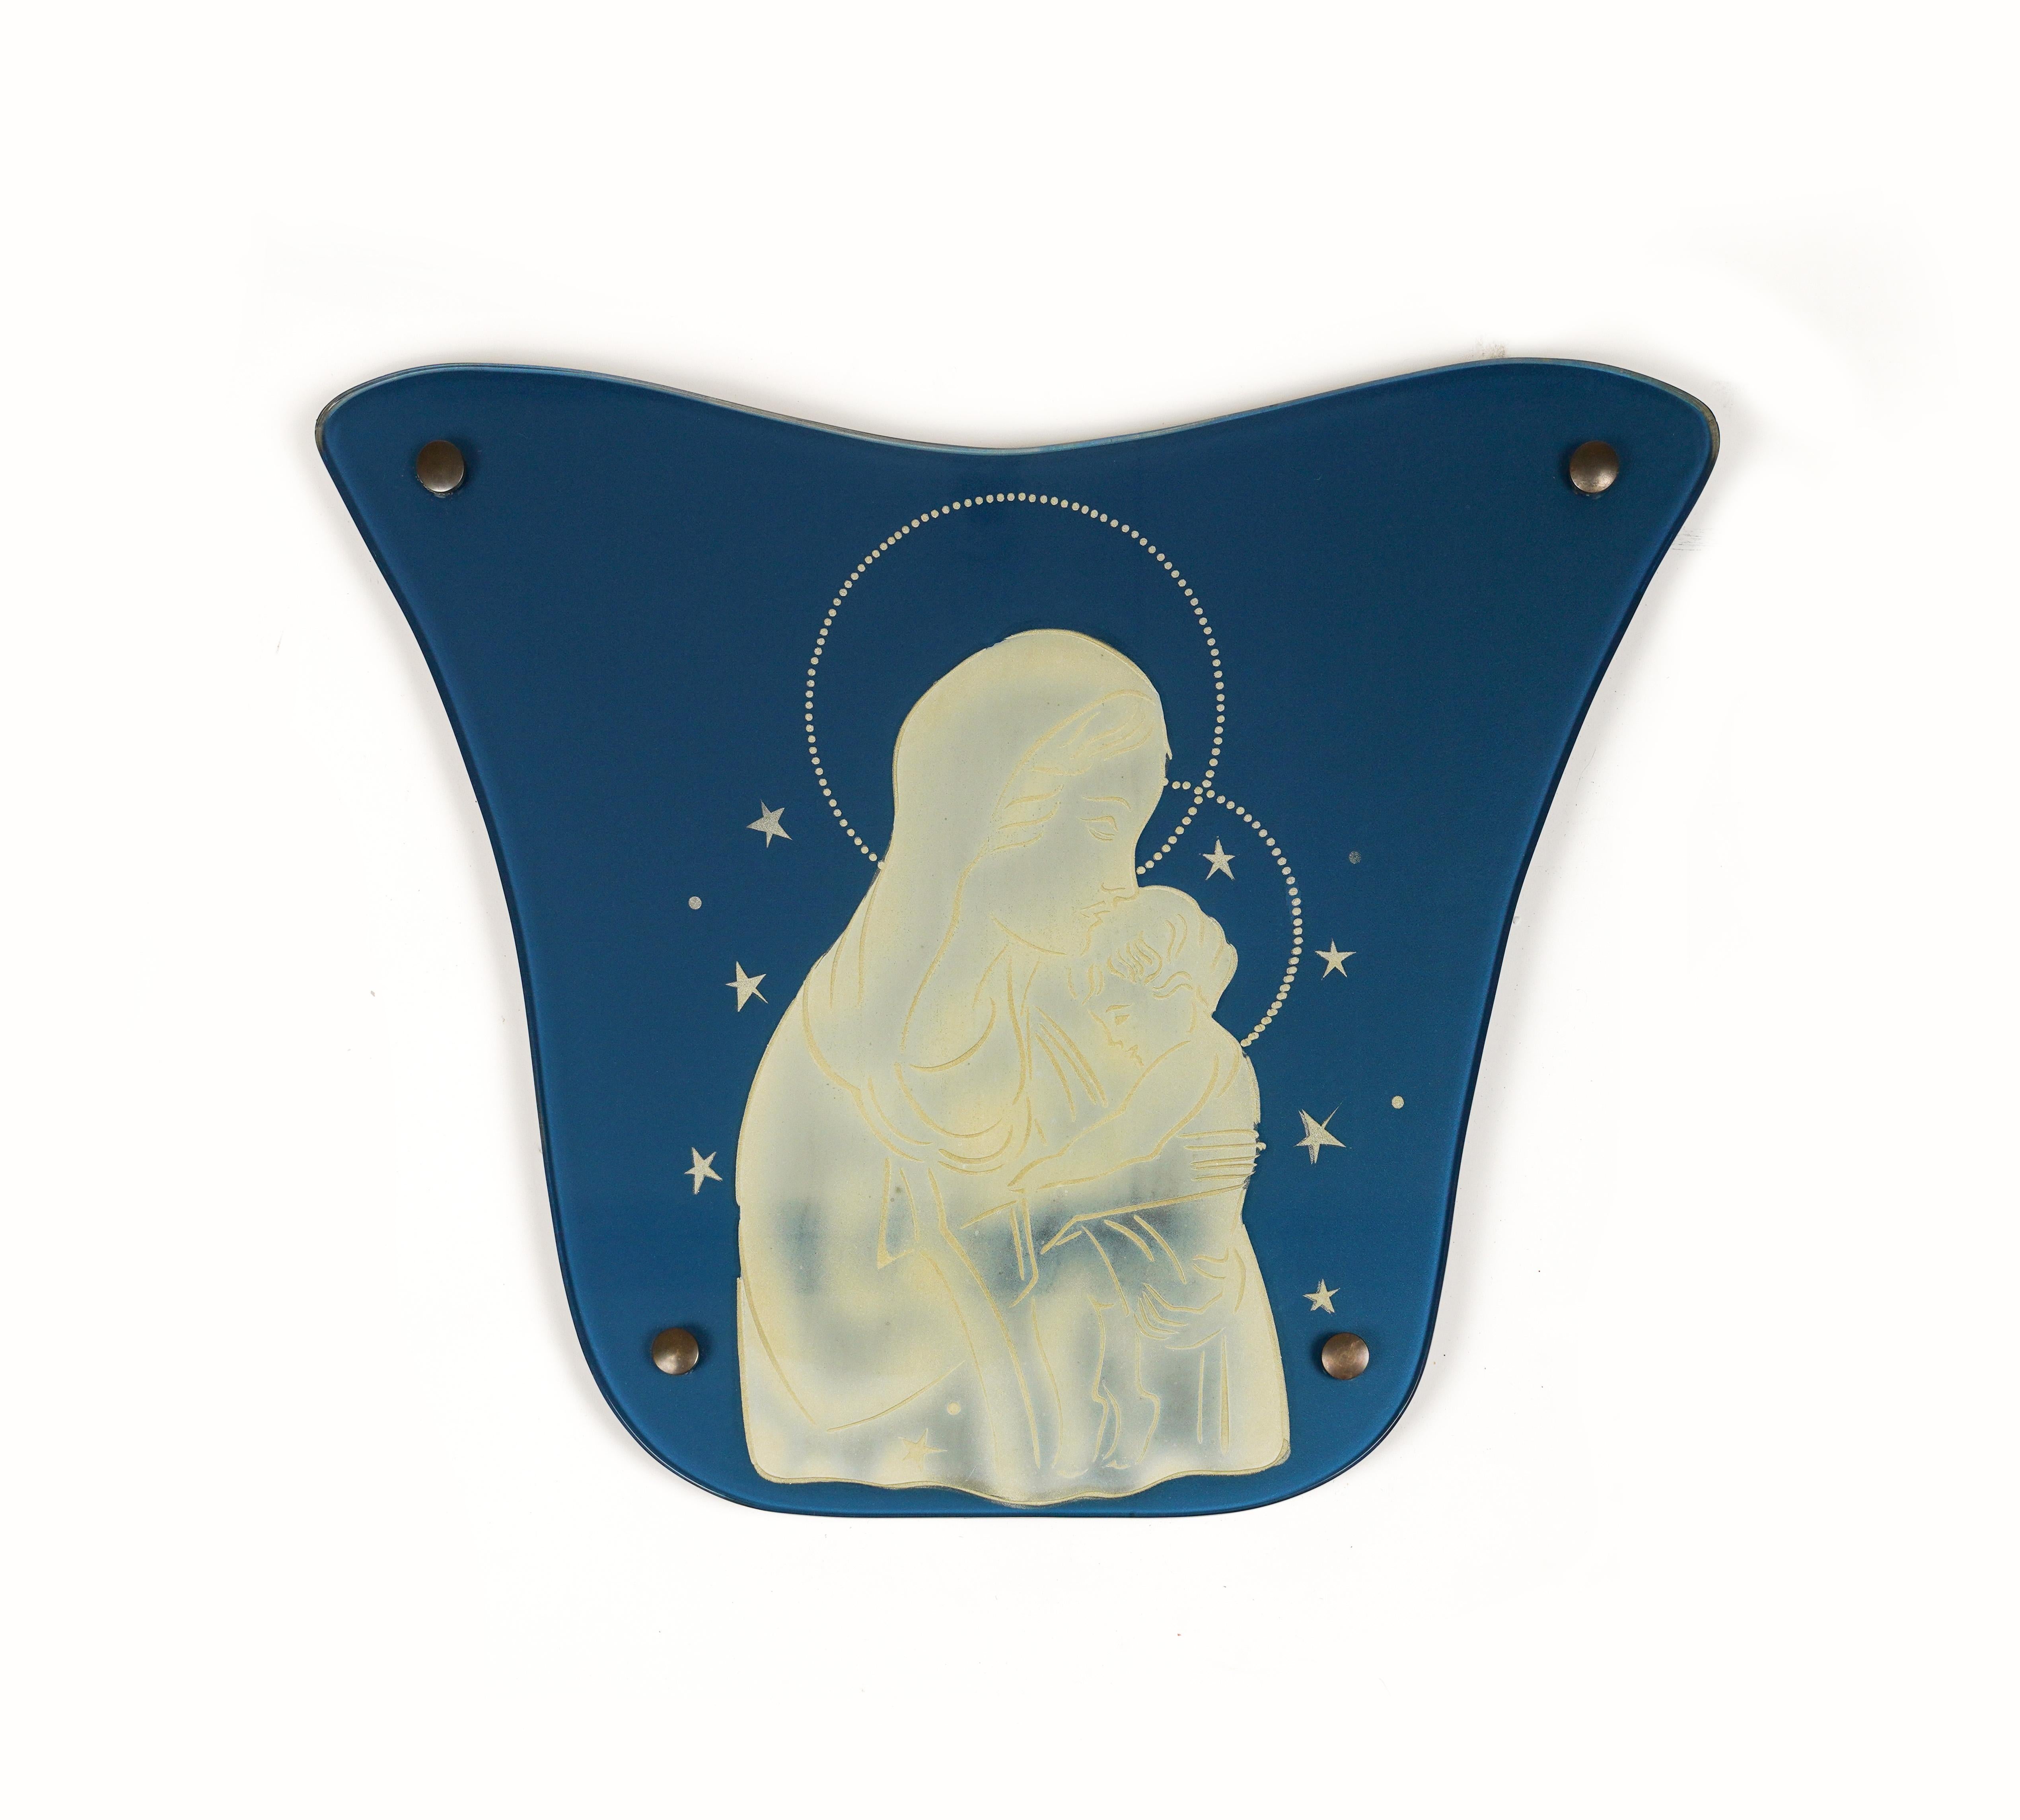 Icon glass with Madonna and Child drawing attributed to Luigi Brusotti for Fontana Arte.

Made in Italy in the 1940s.

The back is made of wood.